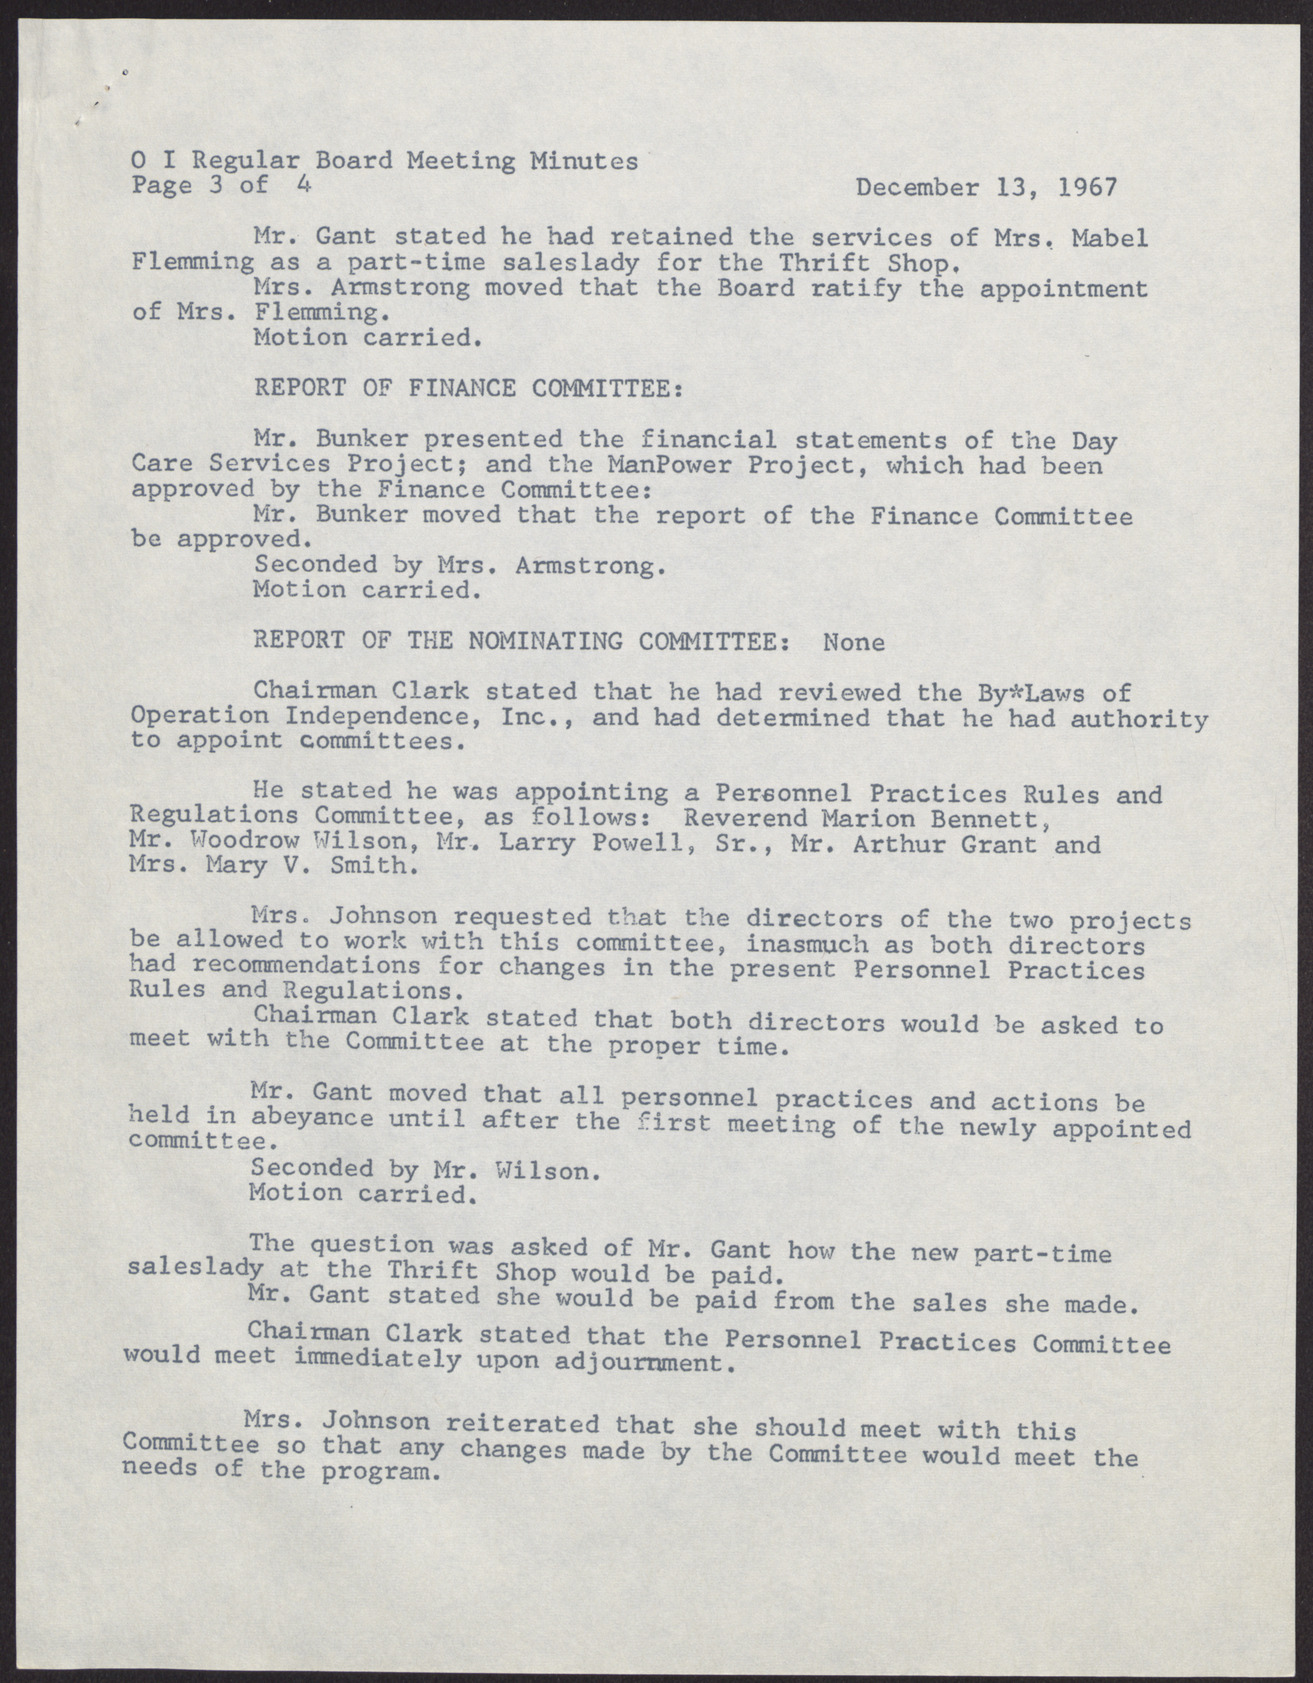 Minutes of Operation Independence Regular Board Meeting (4 pages), December 13, 1967, page 3